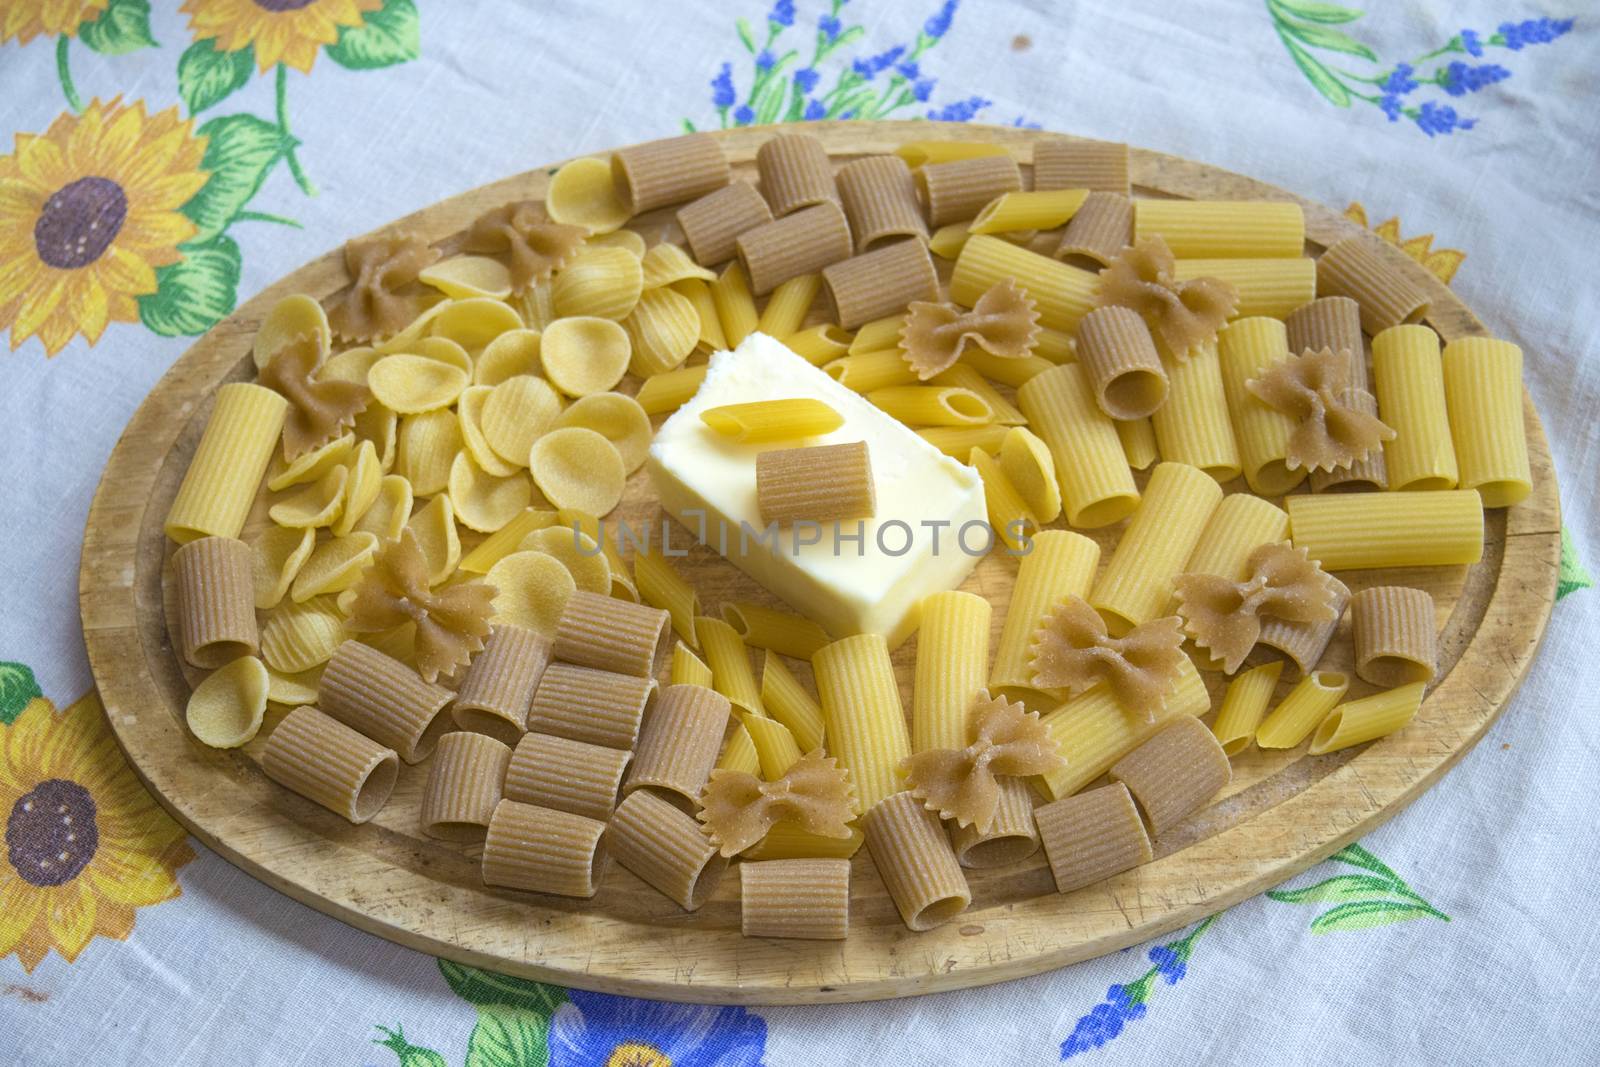  assorted wholemeal and normal raw pasta with a fresh butter